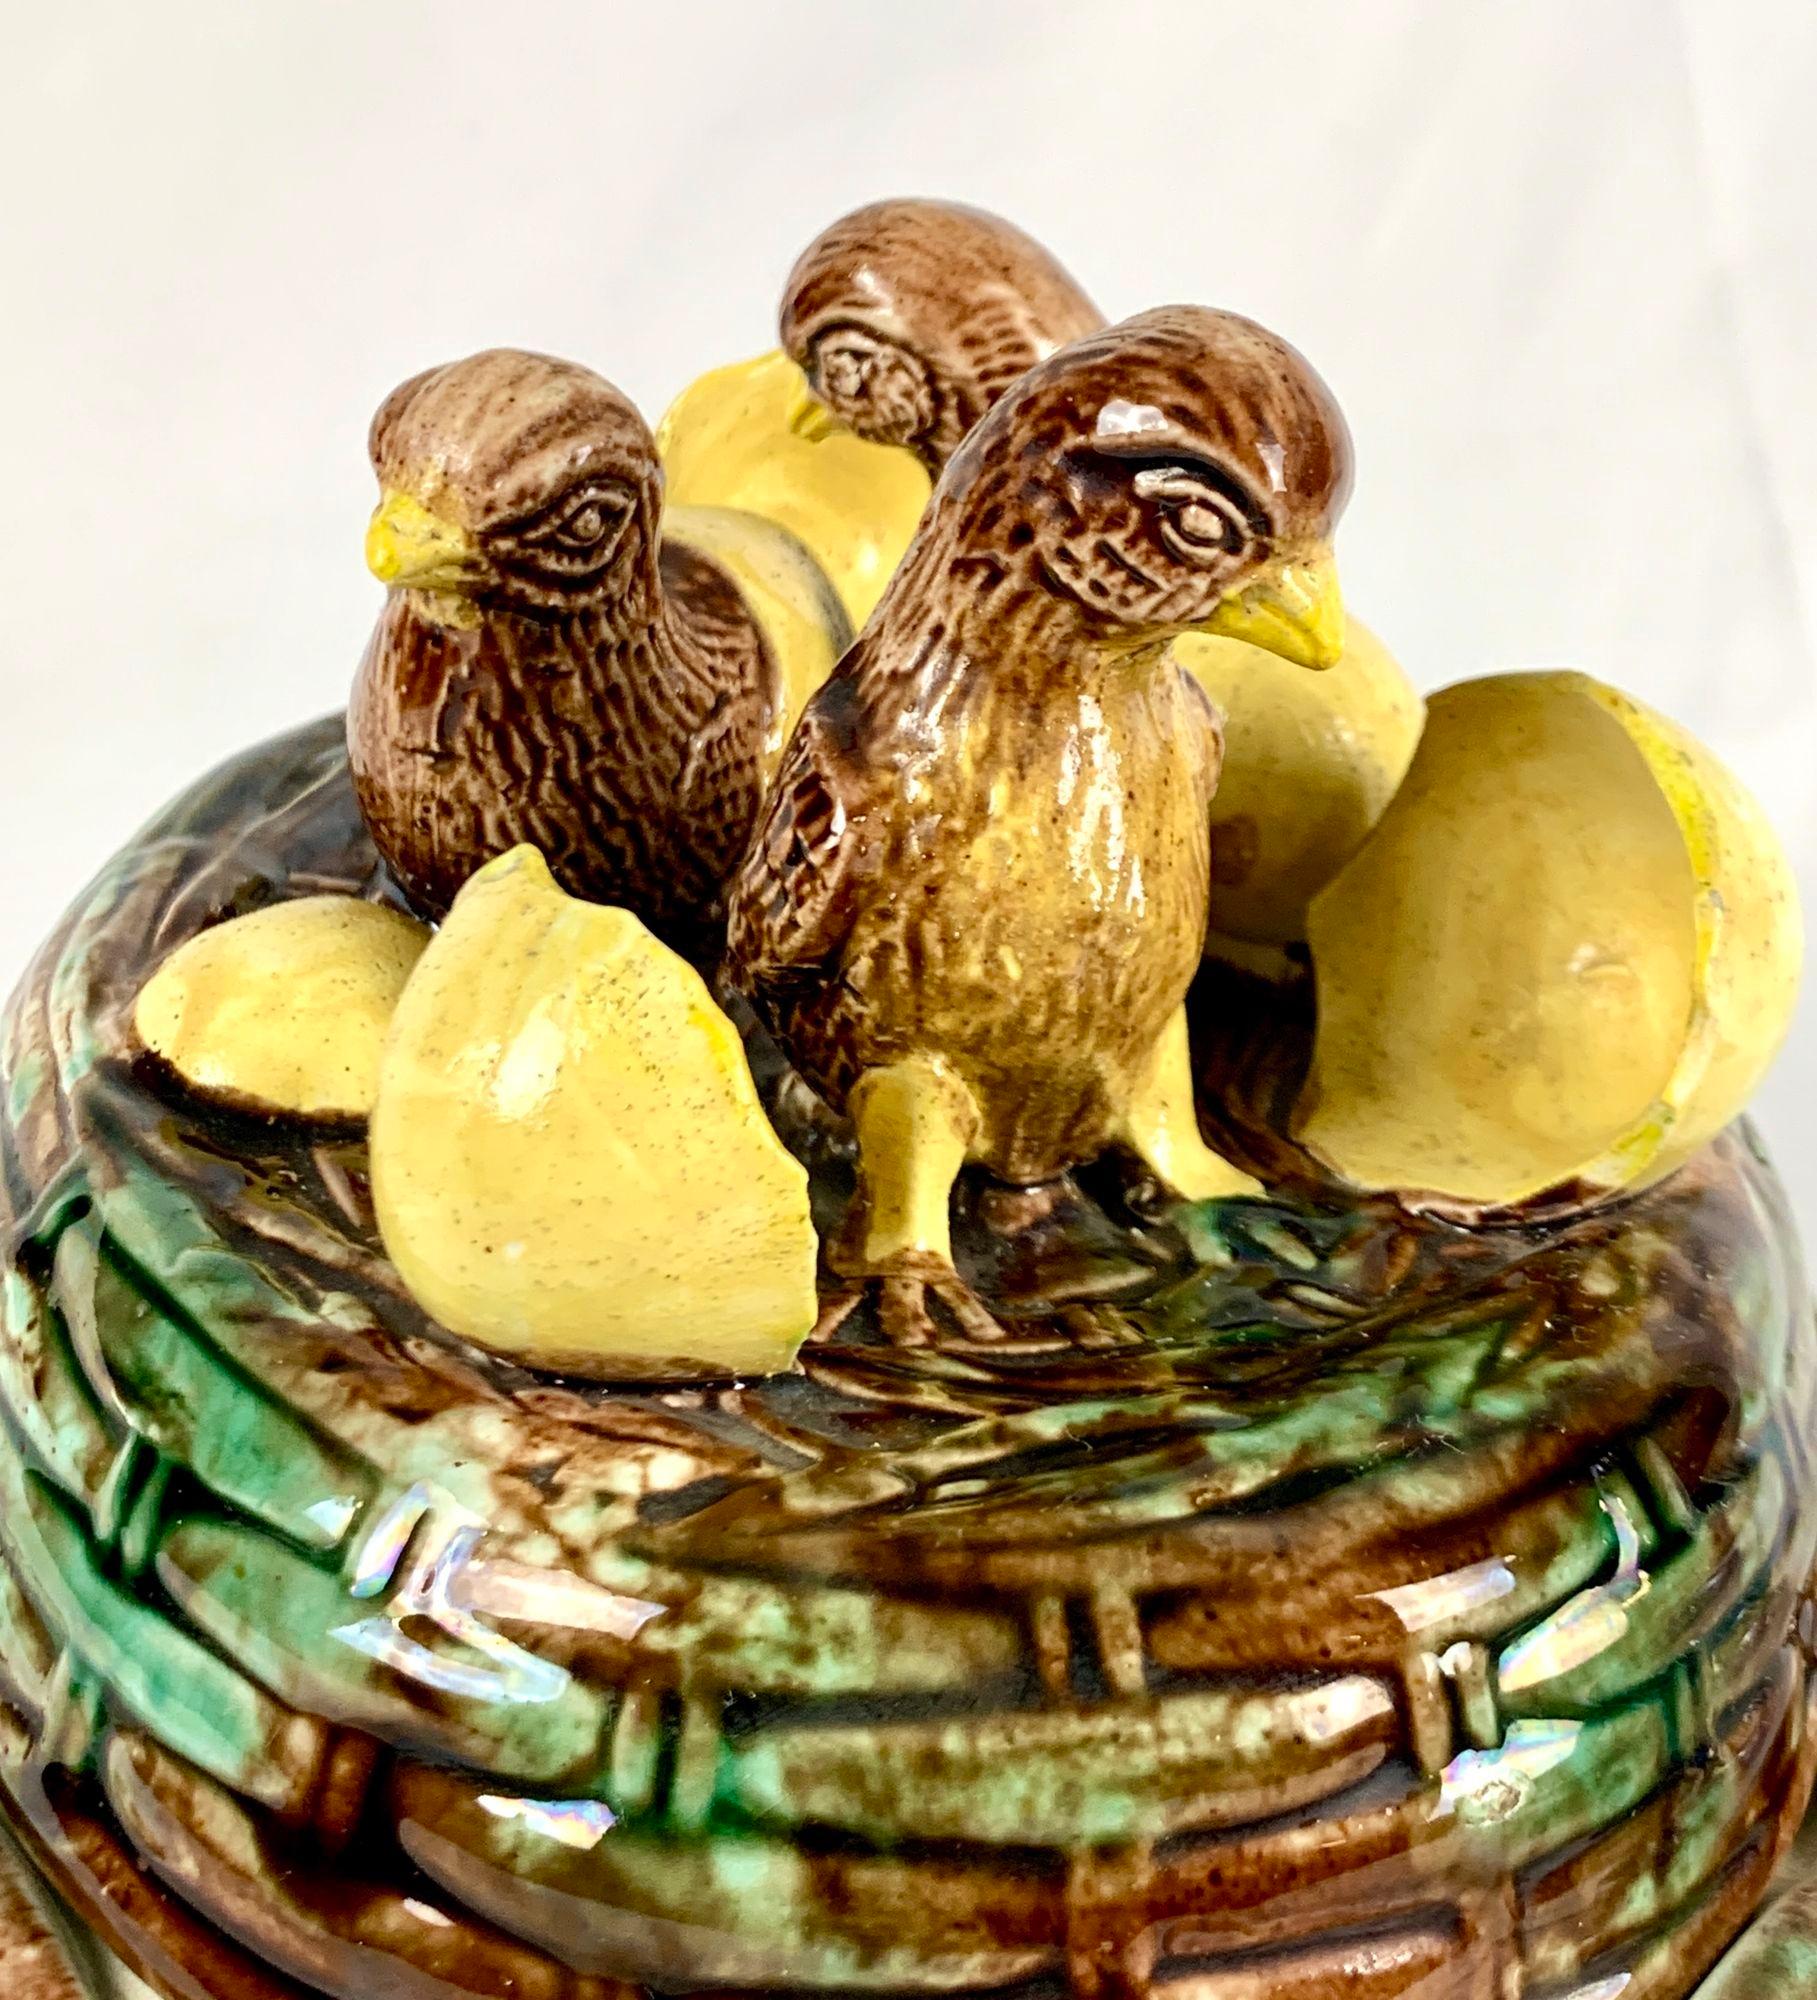 The cover of this majolica game pie dish shows three newly hatched baby chicks emerging from their shells.
The chicks are standing tall and proud.
The brown color of the baby chicks creates a beautiful contrast with the yellow shells and the brown